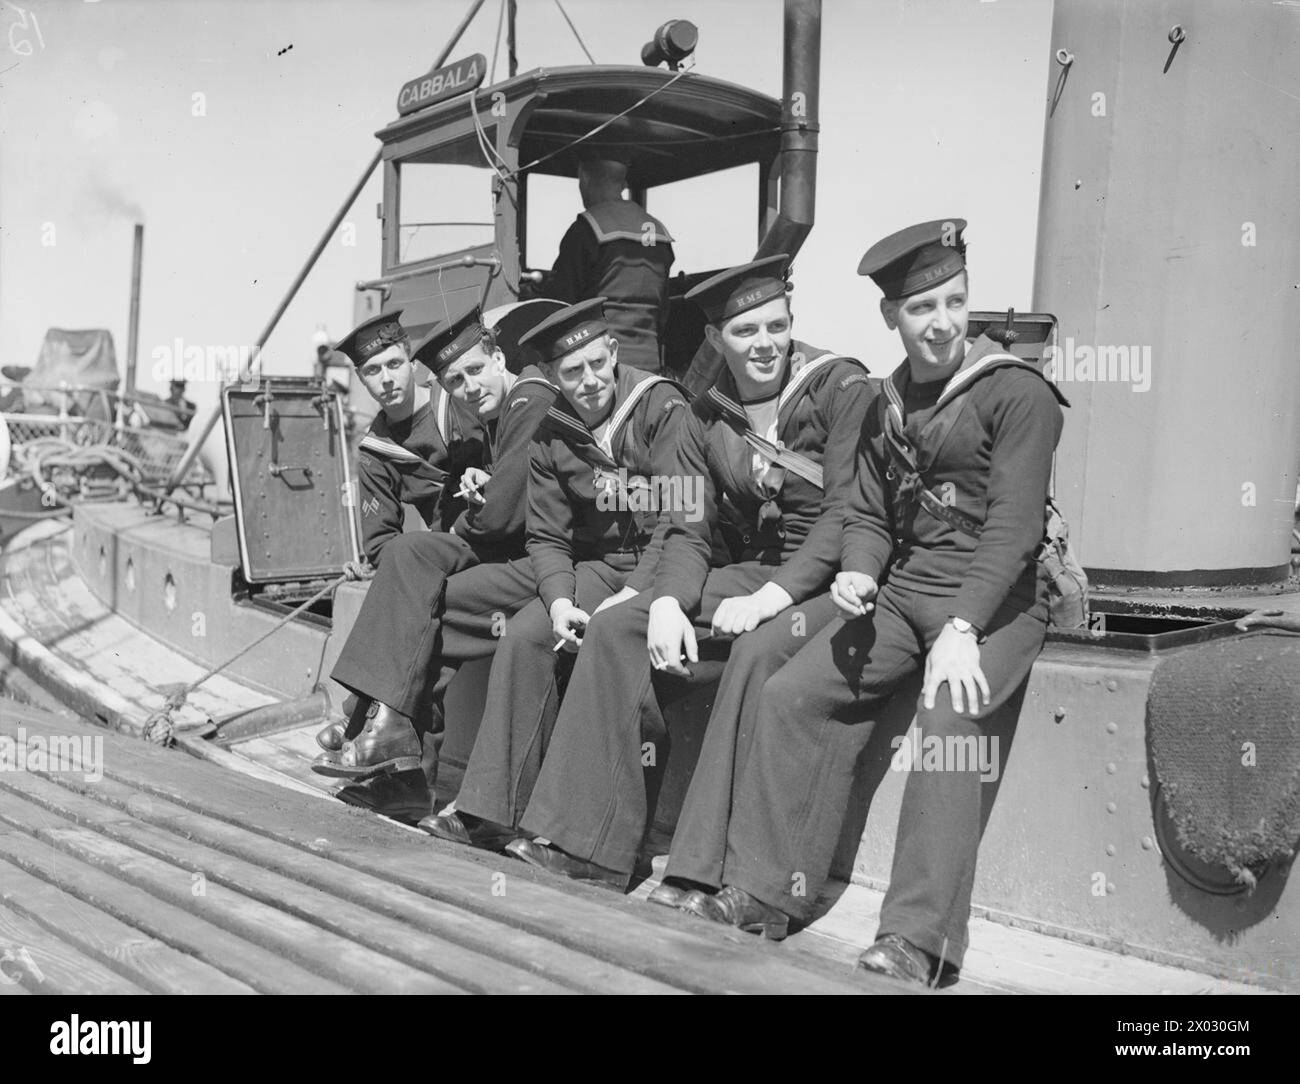 RNVR ORDINARY SEAMEN TRAIN FOR 'HOSTILITIES ONLY COMMISSIONS' MAY 1942, ROYAL NAVAL BARRACKS, DEVONPORT. RNVR MEN TRAINING TO BE RNVR OFFICERS ON A SPECIAL COURSE OF INSTRUCTION AT A NAVAL DEPOT. - RNVR Officers in the making. Left to right: Signalman Pierre De Giey from Mons; Signalman Hugues E O Regout from Brussels; Ordinary Seaman Eric Chote from Wellington, NZ; Ordinary Seaman Edgar Hotchins from Cleveland, Ohio, USA; Ordinary Seaman Jack Prince from Darwen, Lancashire Stock Photo